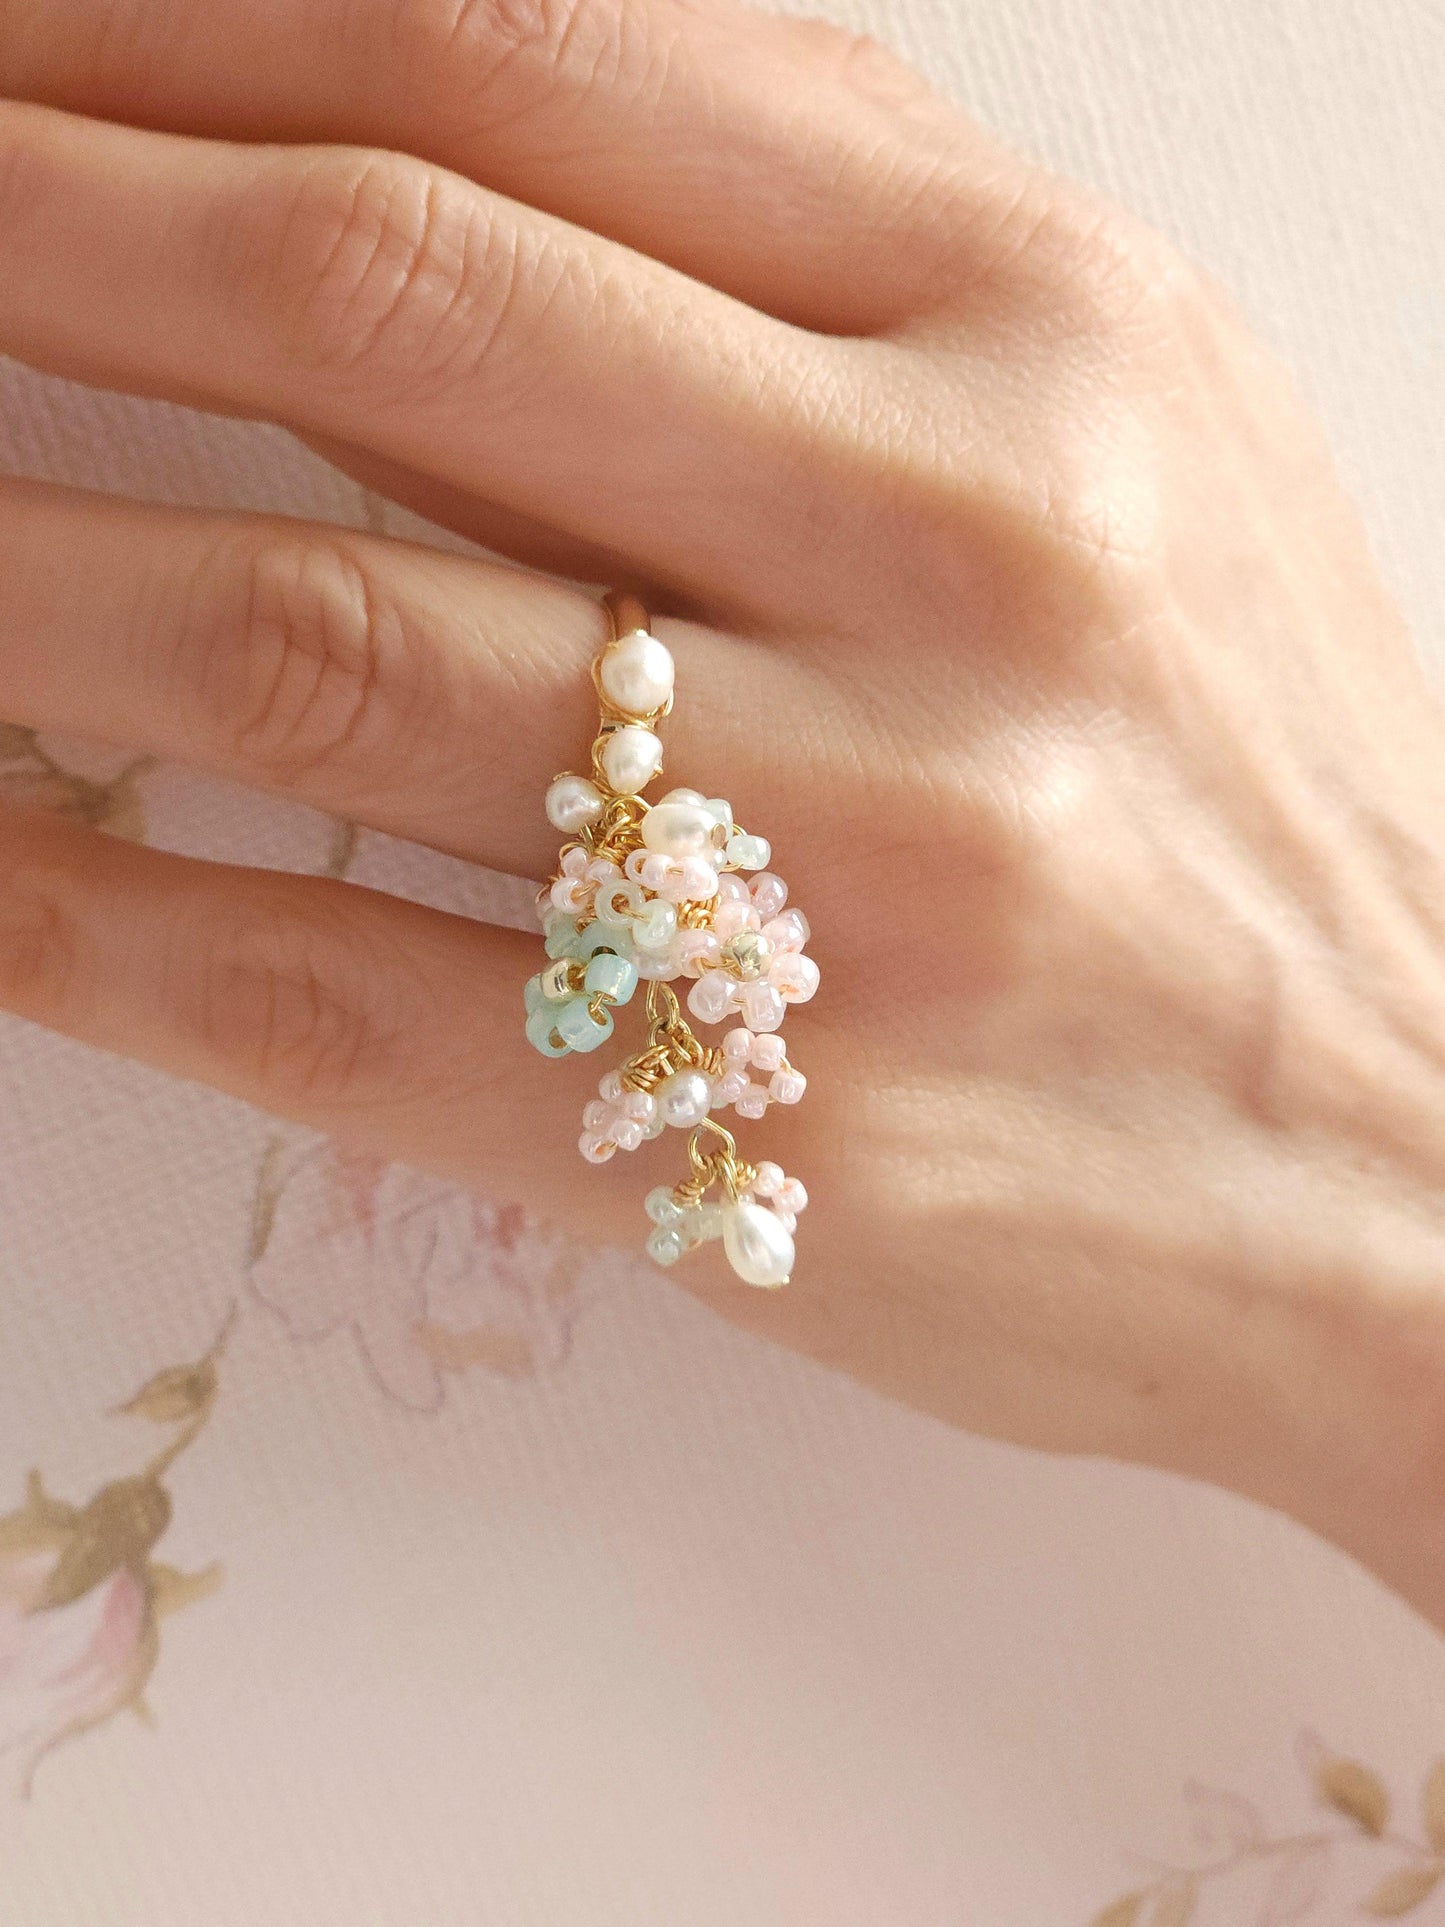 Dreamy Tides Bouquet Ring - By Cocoyu